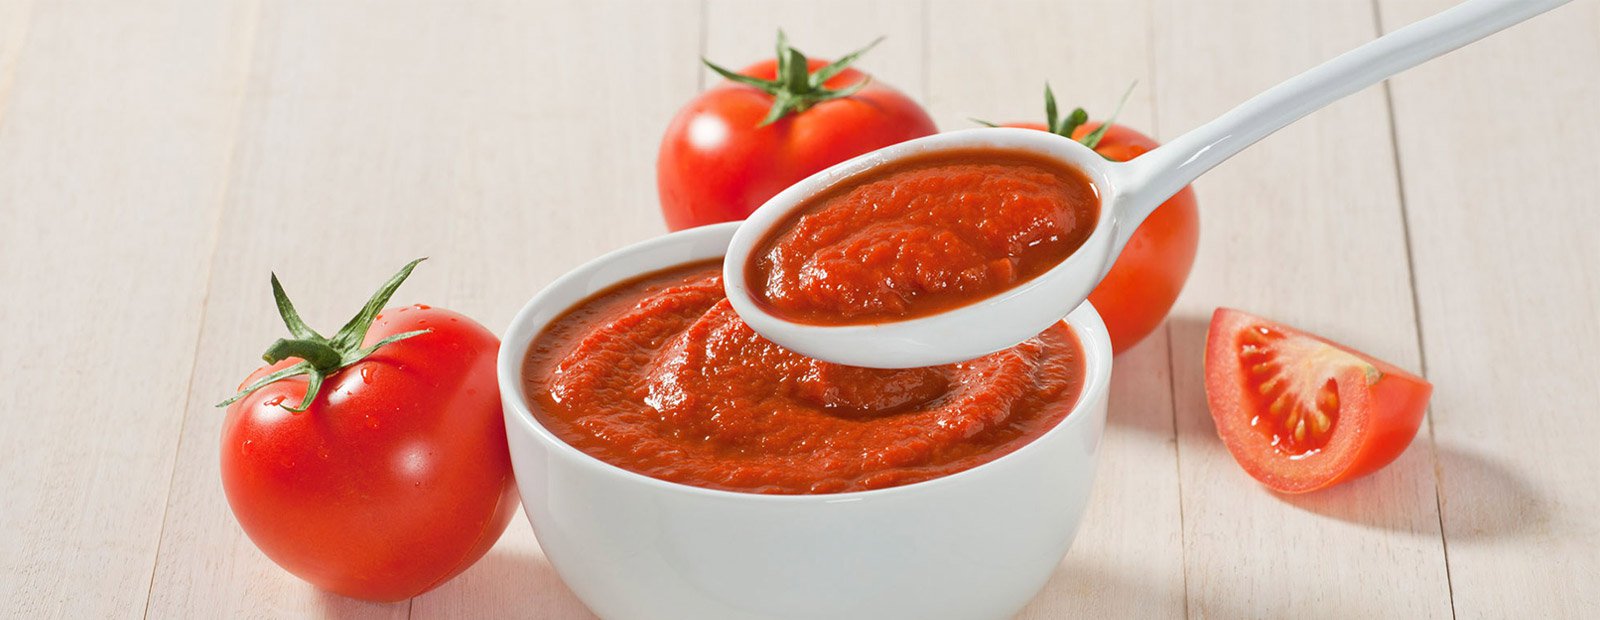 Tomato paste: how to use it in the kitchen